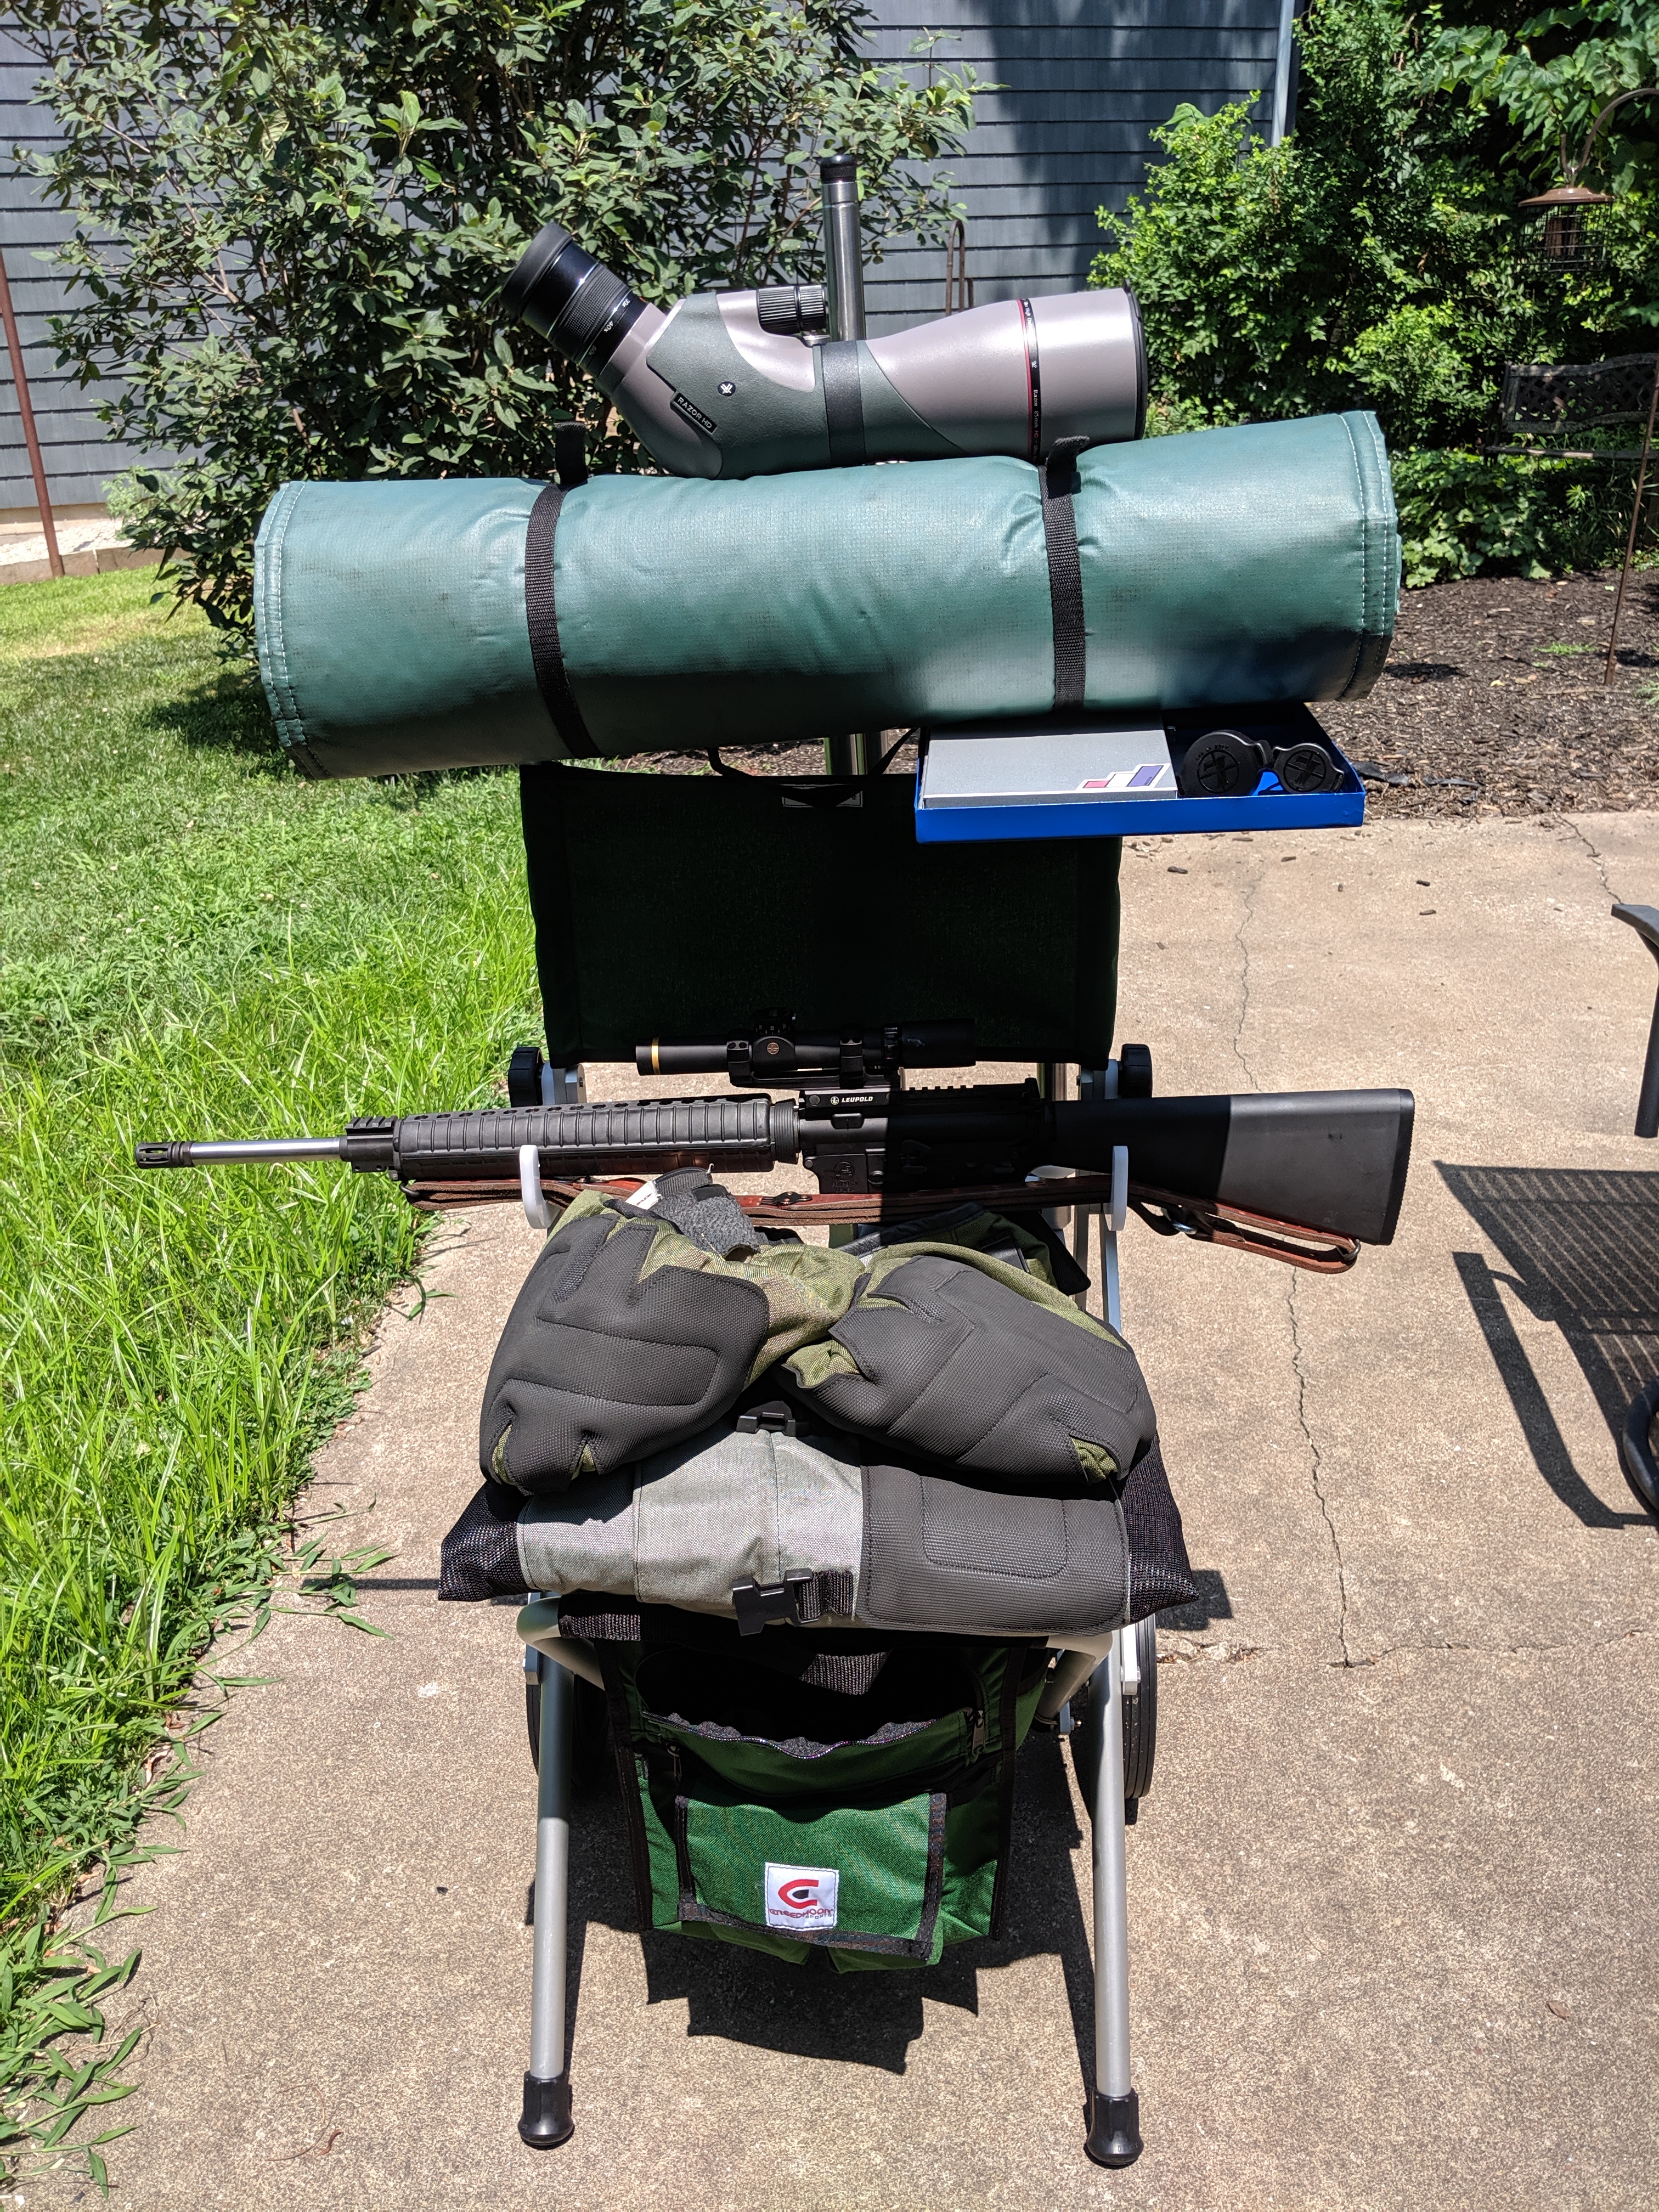 My highpower range cart, fully loaded (and a bit top-heavy)